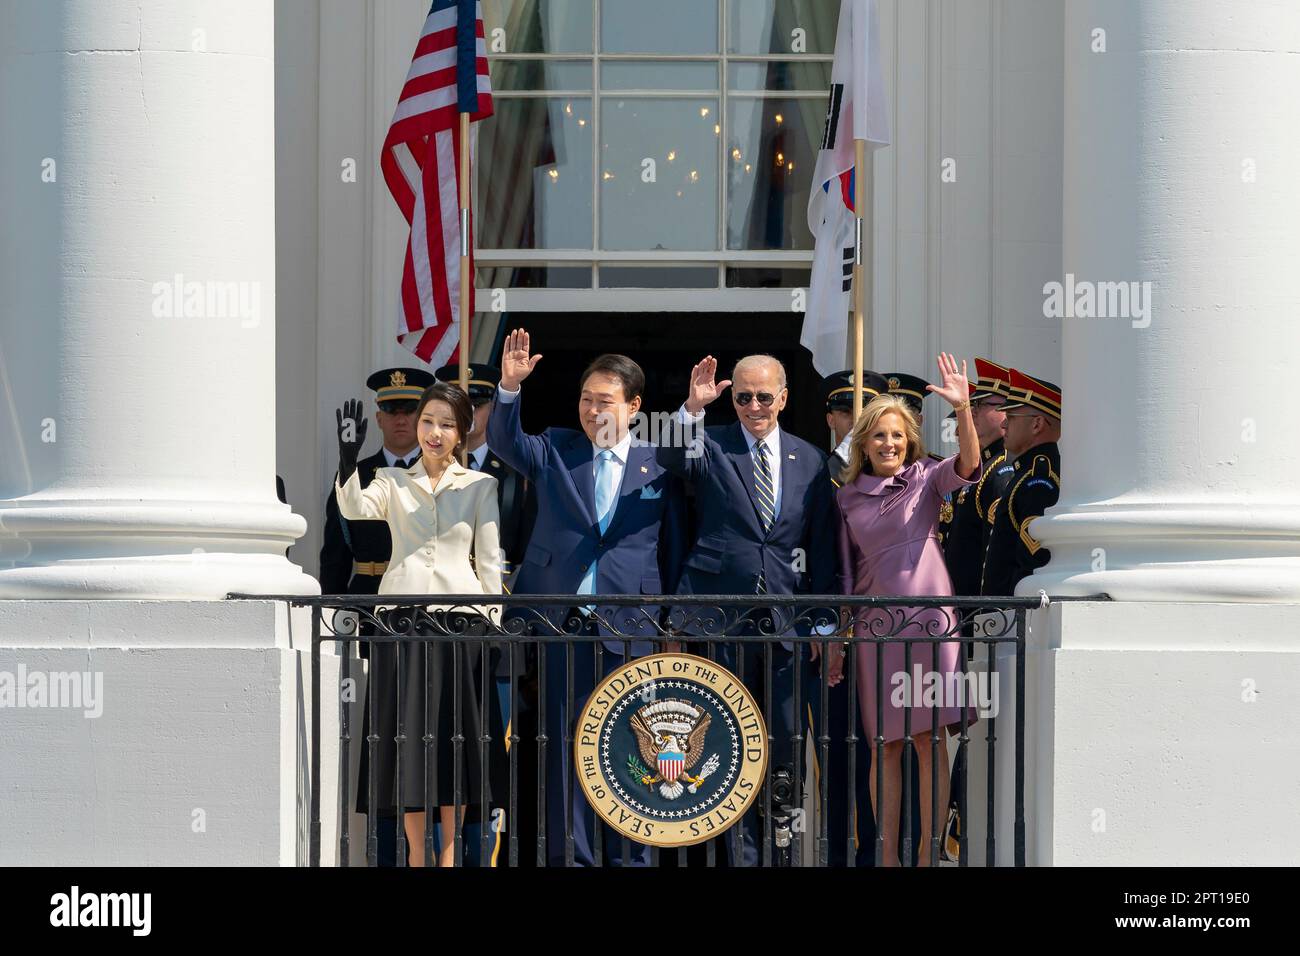 Washington, United States Of America. 26th Apr, 2023. Washington, United States of America. 26 April, 2023. U.S President Joe Biden and South Korean President Yoon Suk-yeol wave during the State Arrival Ceremony from the Blue Room balcony at the White House April 26, 2023 in Washington, DC Standing from left are: South Korean First Lady Kim Keon Hee, South Korean President Yoon Suk Yeol, U.S. President Joe Biden and first lady Jill Biden. Credit: Adam Schultz/White House Photo/Alamy Live News Stock Photo